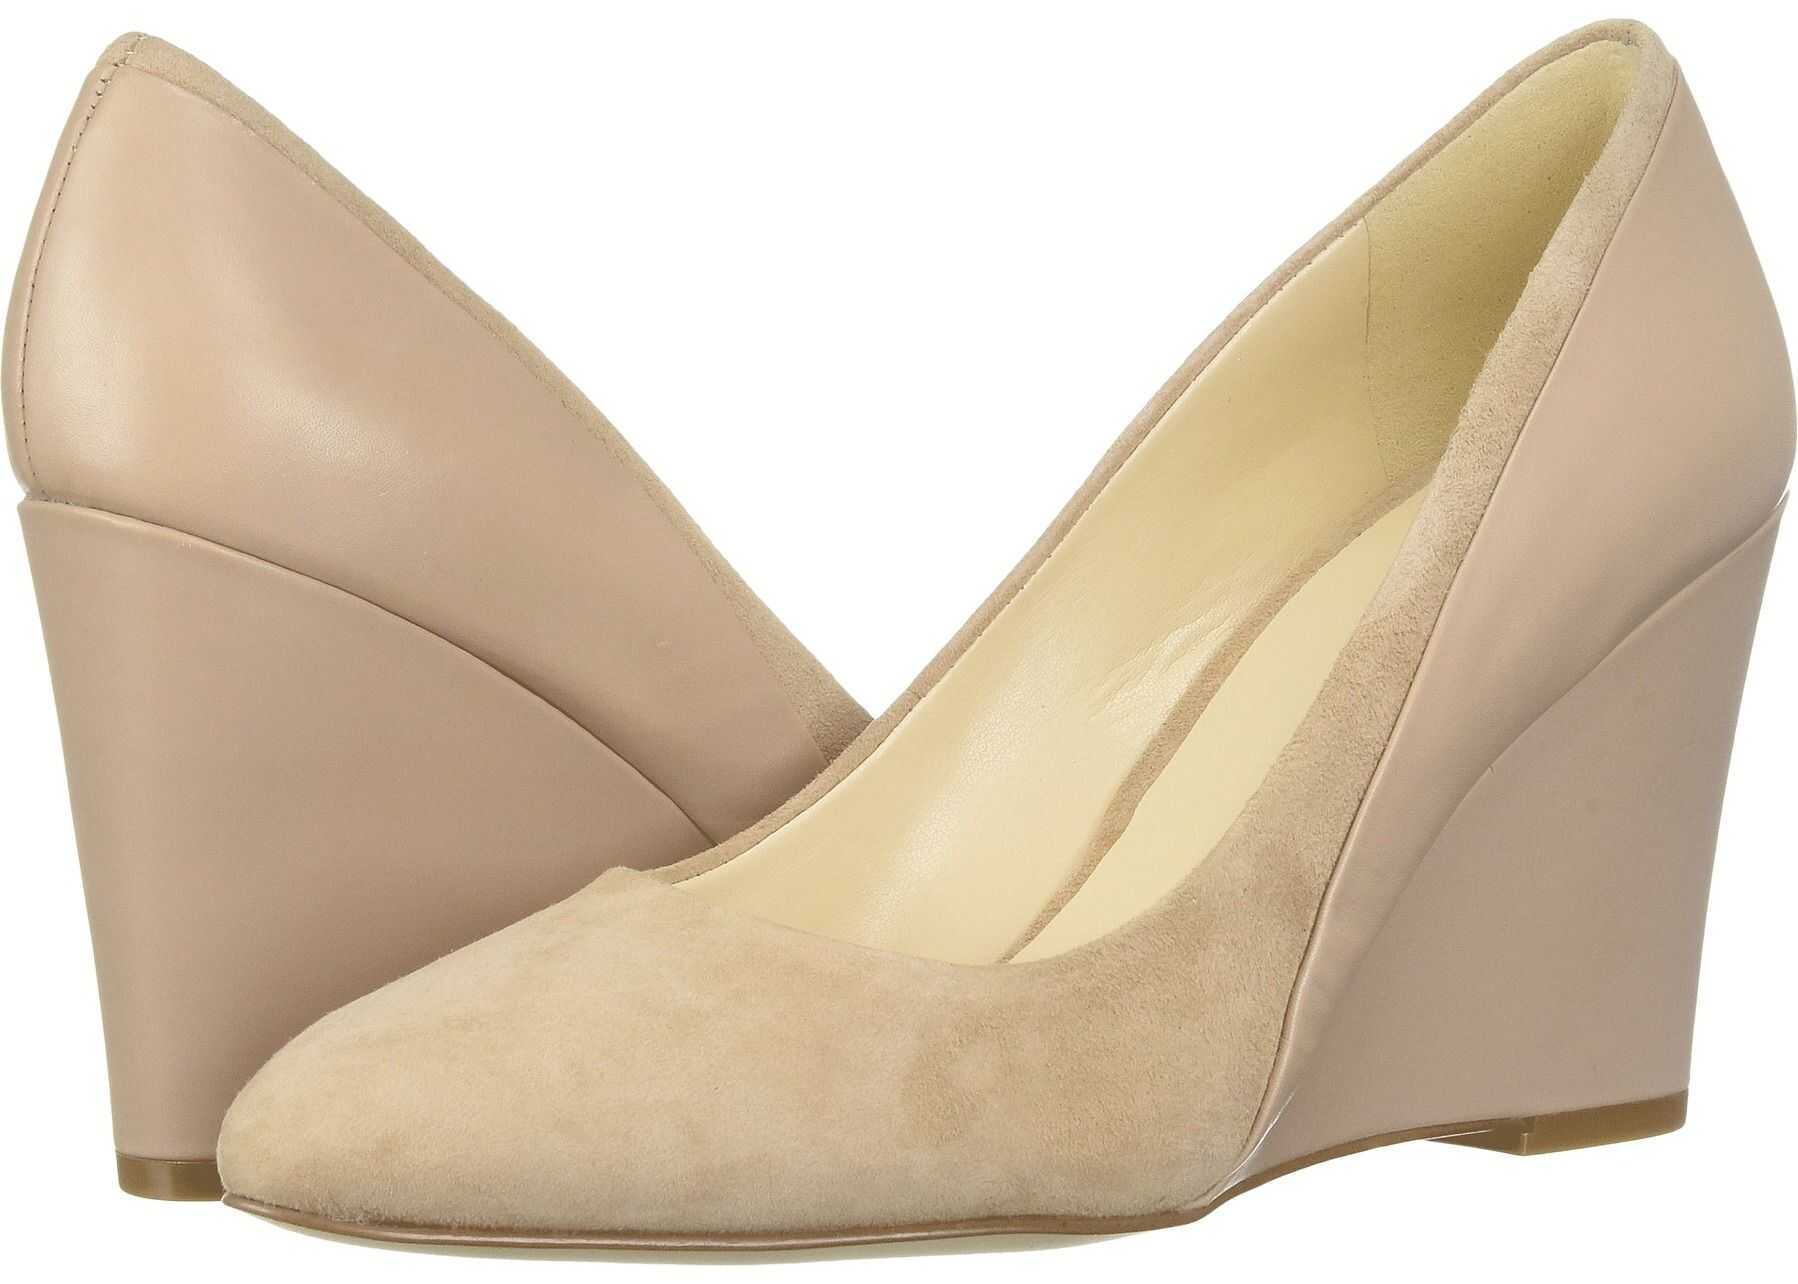 Nine West Daday Dress Wedge Barely Nude/Barely Nude Isa Suede/Dress Calf